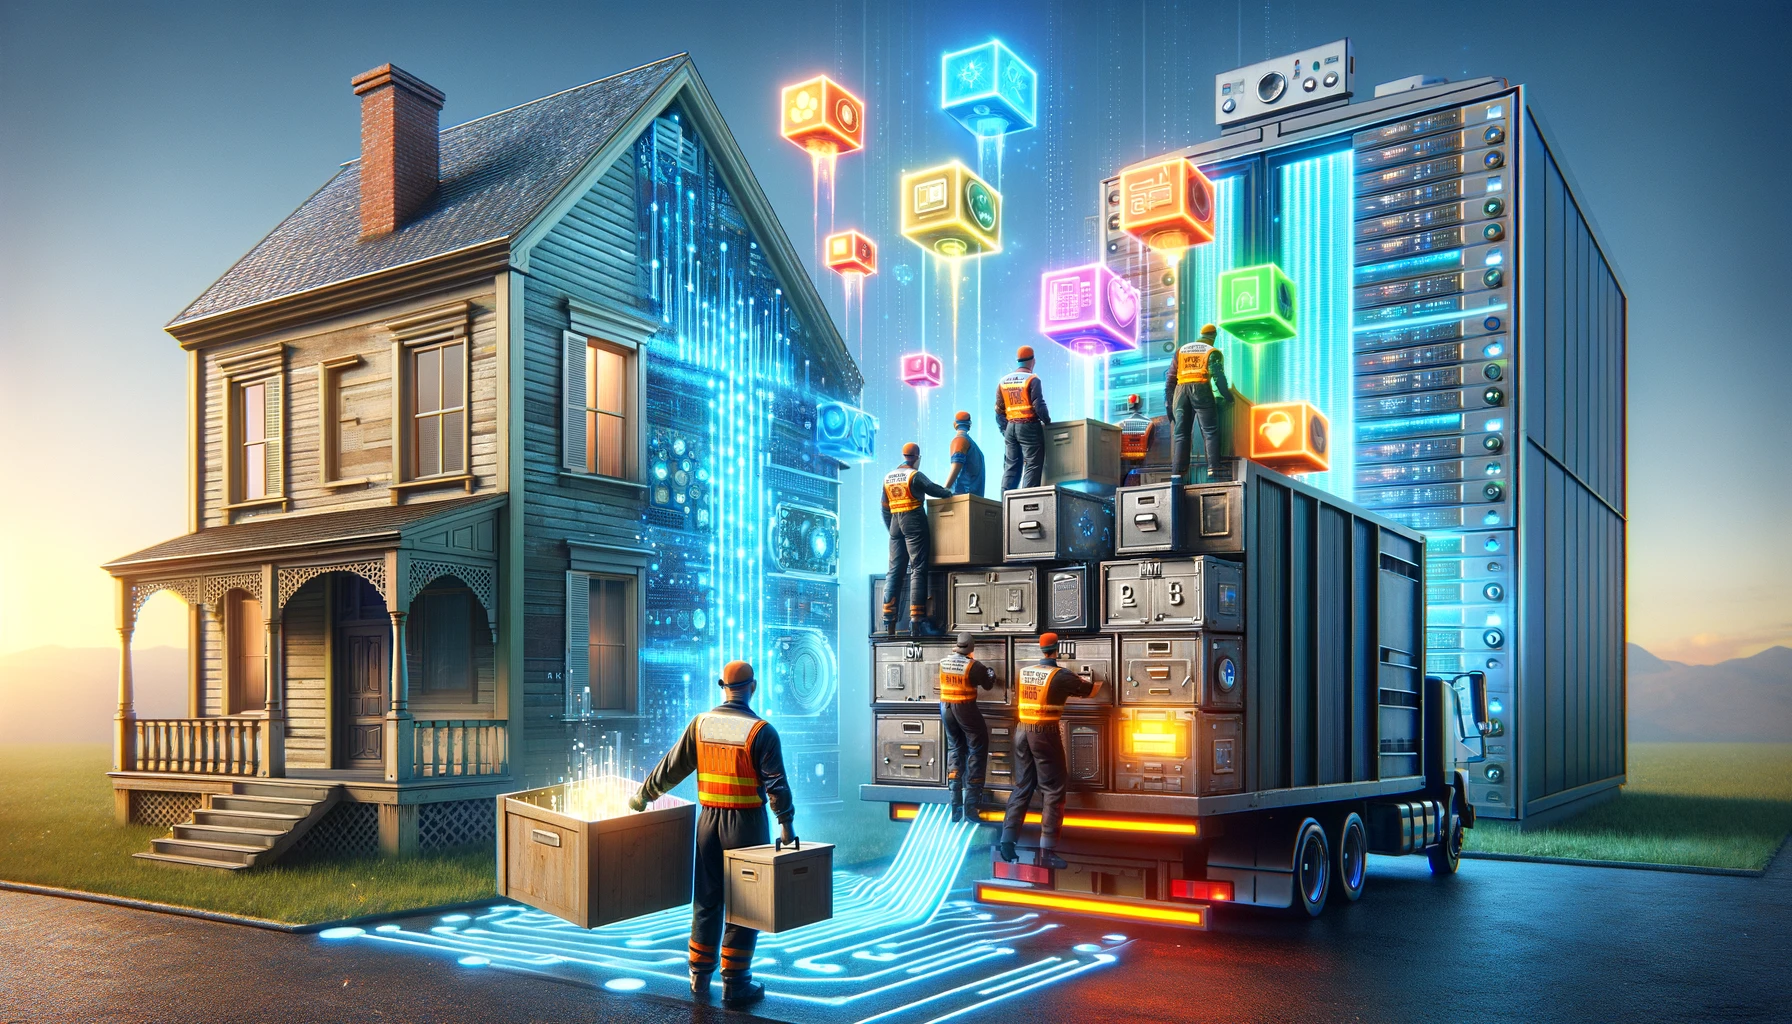 Imagine a metaphorical scene depicting a moving company specialized in data transfer. The movers, dressed in futuristic uniforms, are using advanced technology-themed equipment to carry and transfer glowing symbolic data units from an old-fashioned house to a modern, high-tech storage facility. The data units, representing files, folders, and multimedia, glow brightly in various colors, emphasizing the transfer of information. The old house is traditional and vintage, while the storage facility is sleek, contemporary, and brimming with cutting-edge technology. The environment is bright and clear, underscoring the transition from the analog past into the digital future, making the scene visually compelling and full of contrast between the old and the new. This scene illustrates the process of data migration in an imaginative and engaging way.